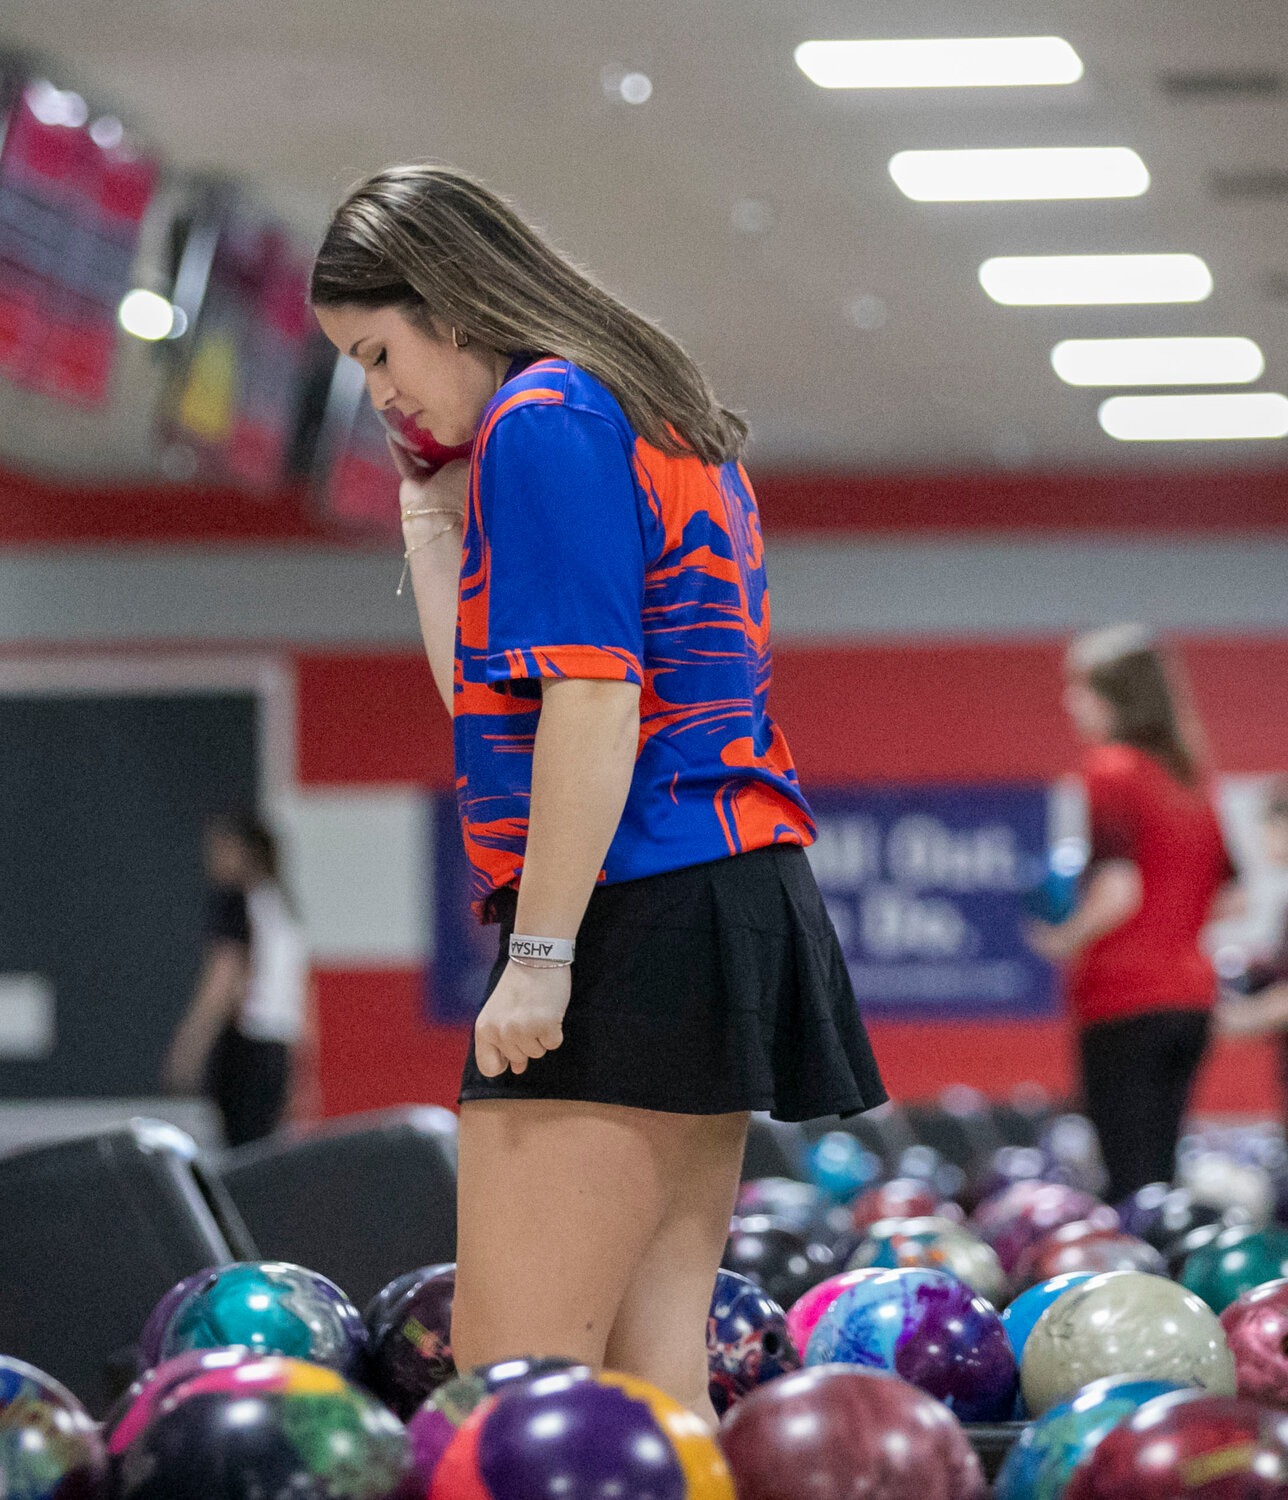 Orange Beach’s Mari Hayden Reeves lines up her shot on Thursday, Feb. 1, at Bowlero Mobile during the traditional rounds for seeding as part of AHSAA’s state championships. Reeves finished 27th overall with a three-game total of 363 to help the Makos take the No. 7 seed into Friday’s finals.